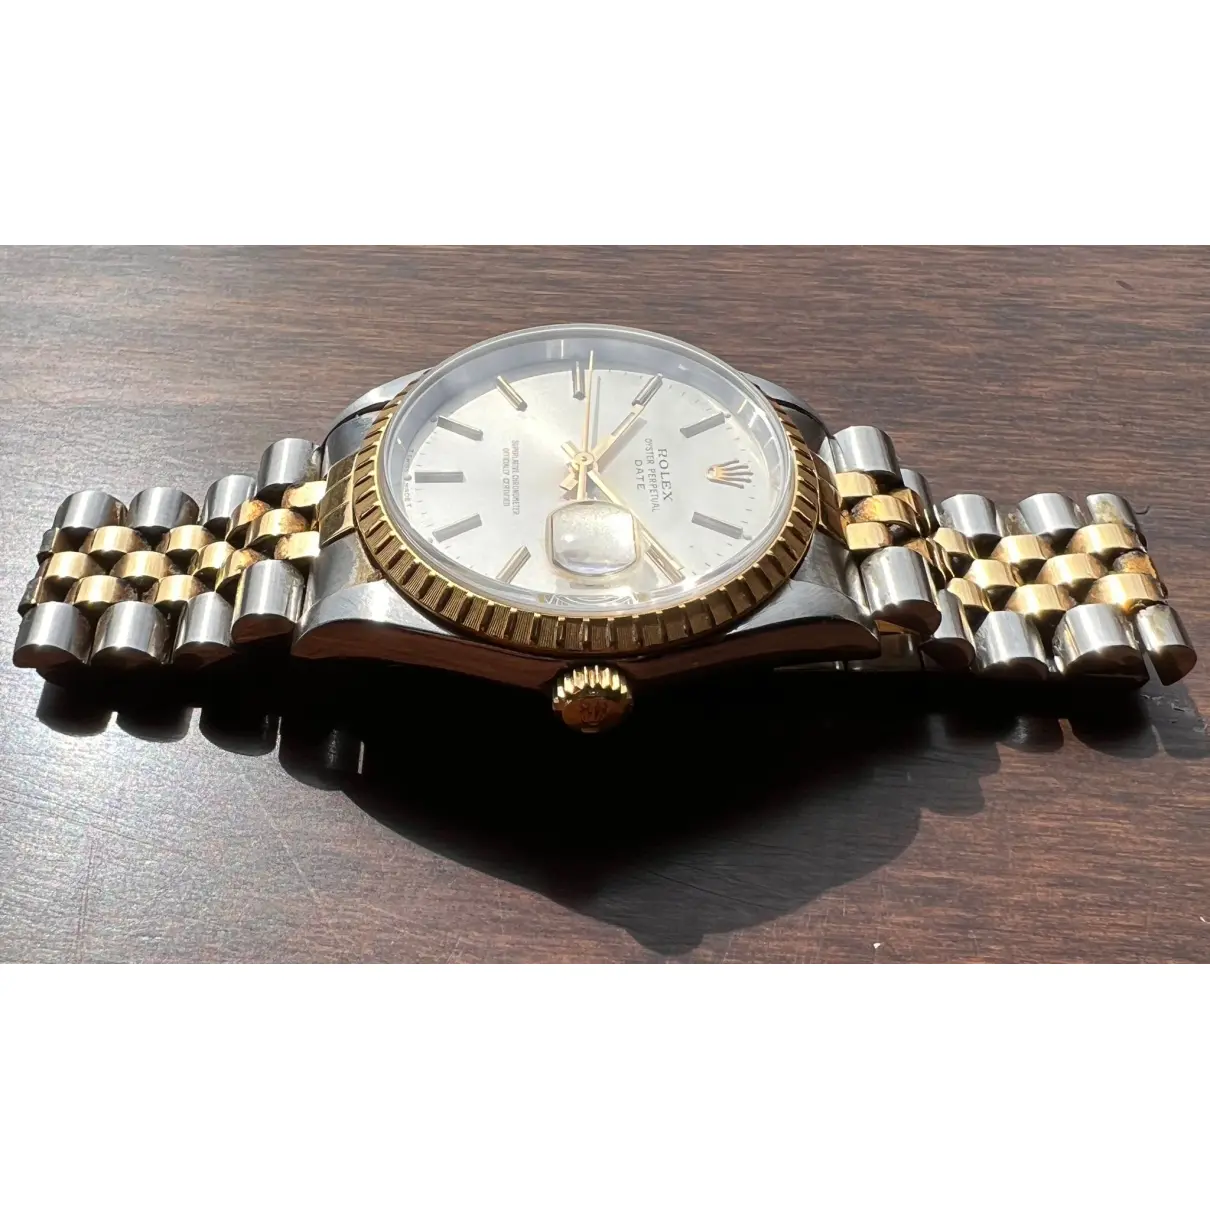 Buy Rolex Oyster Perpetual 36mm yellow gold watch online